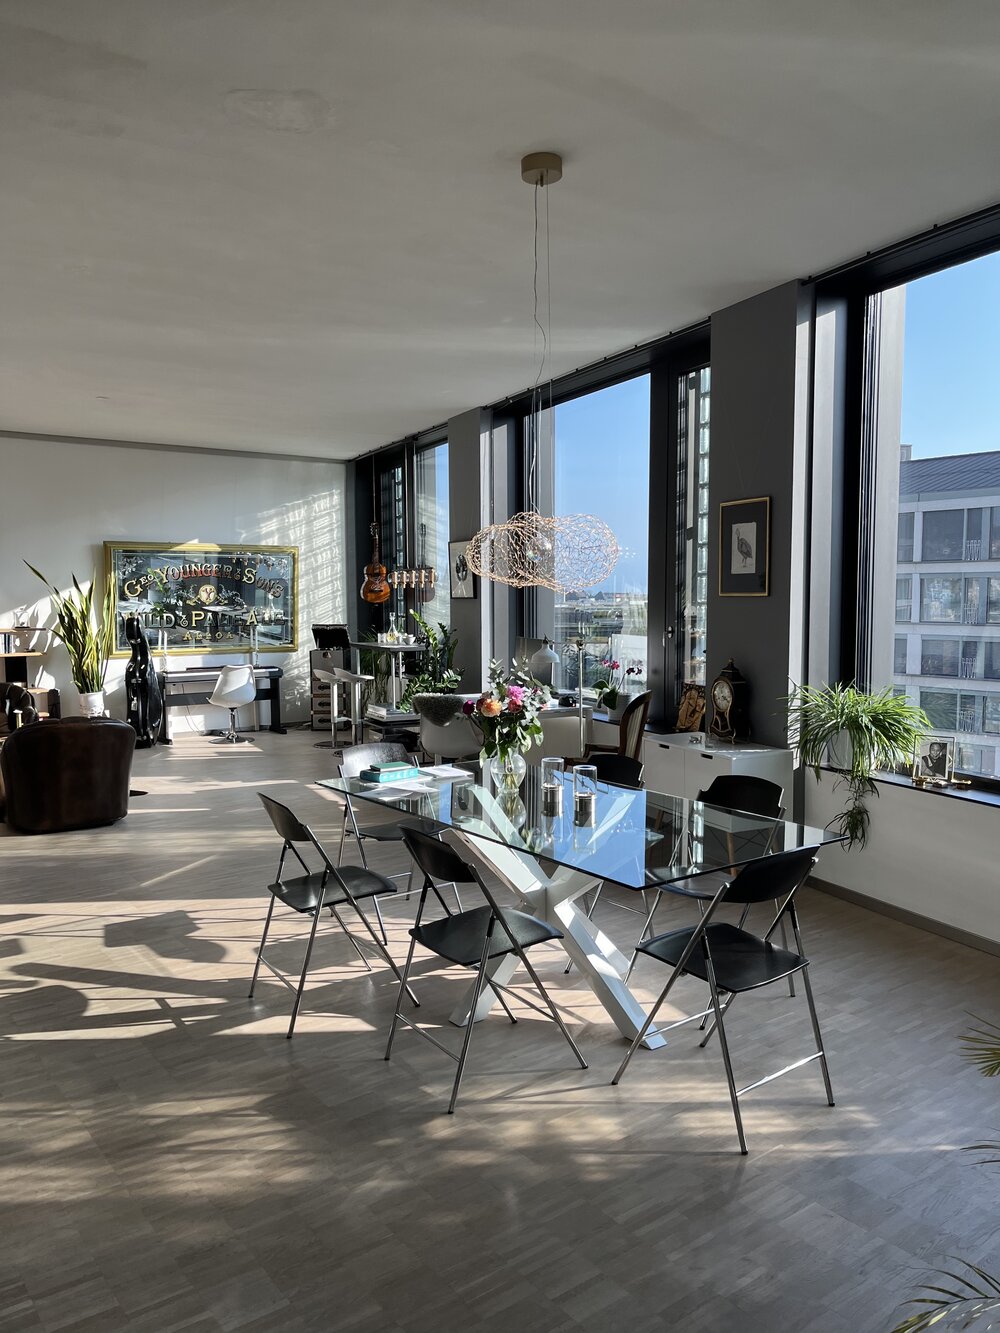 Beautiful Sublet 2.5 room furnished apartment Europaallee...